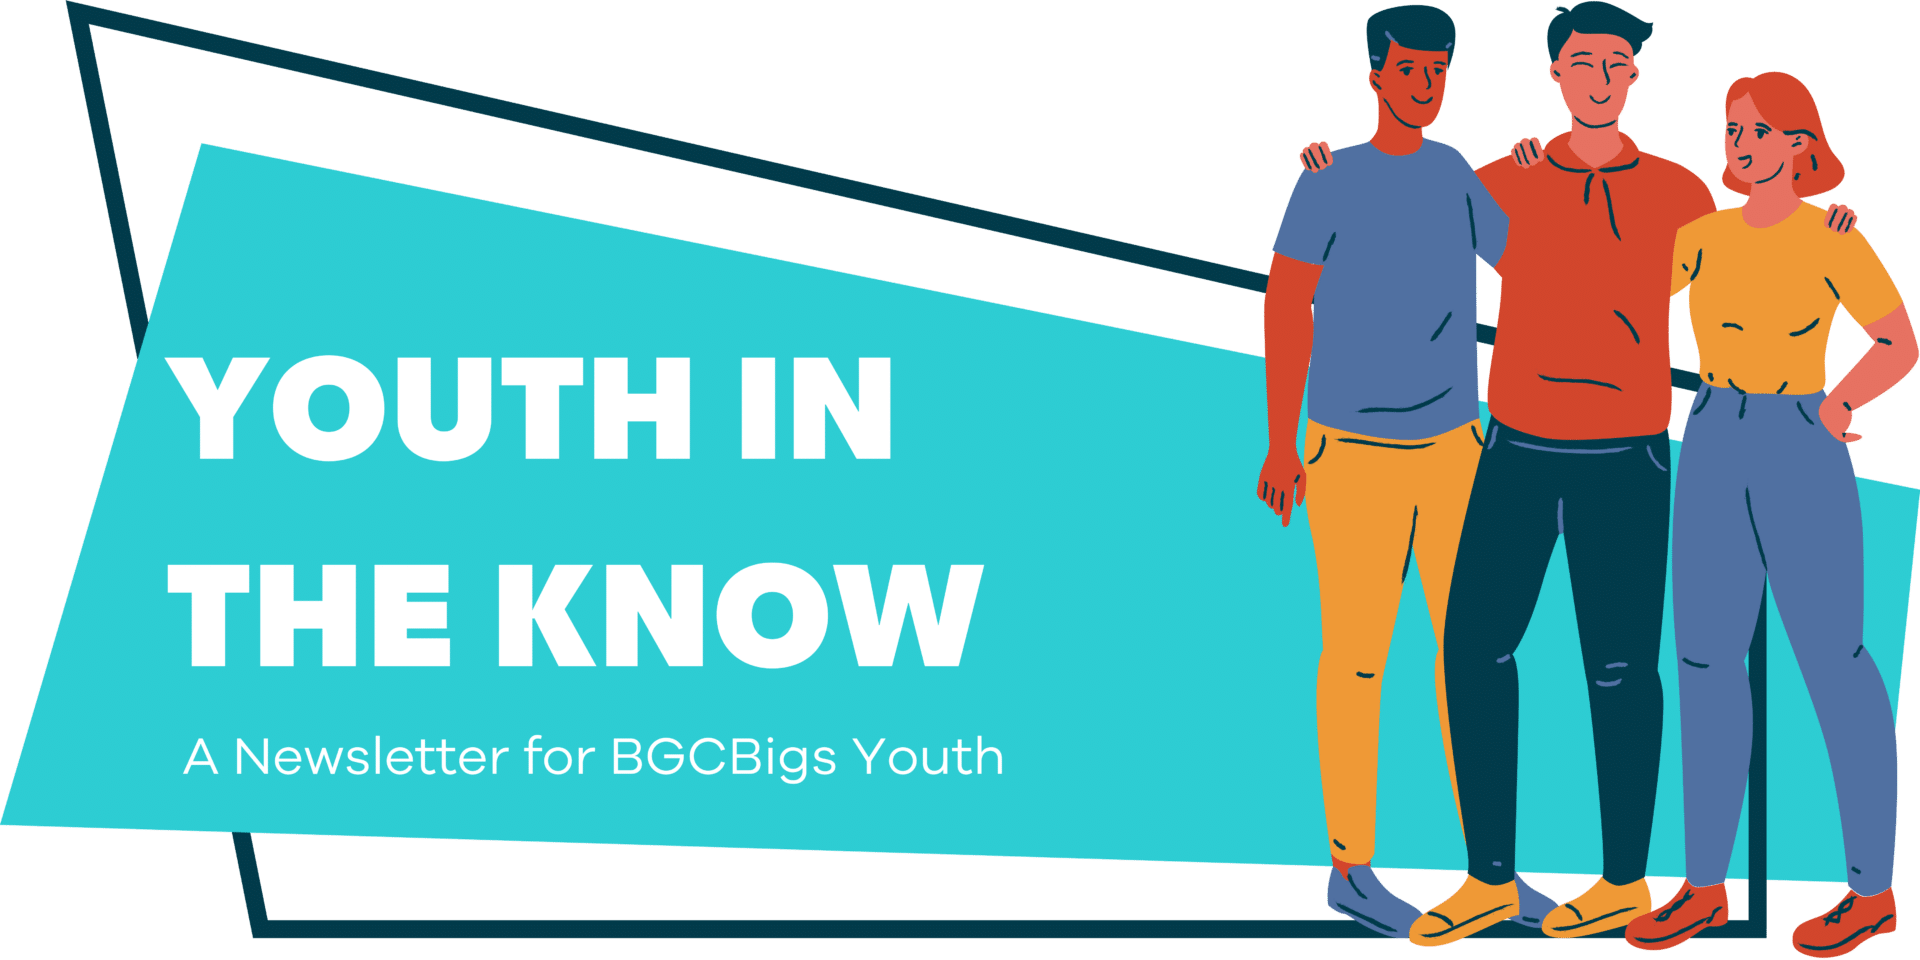 YOUTH IN THE KNOW